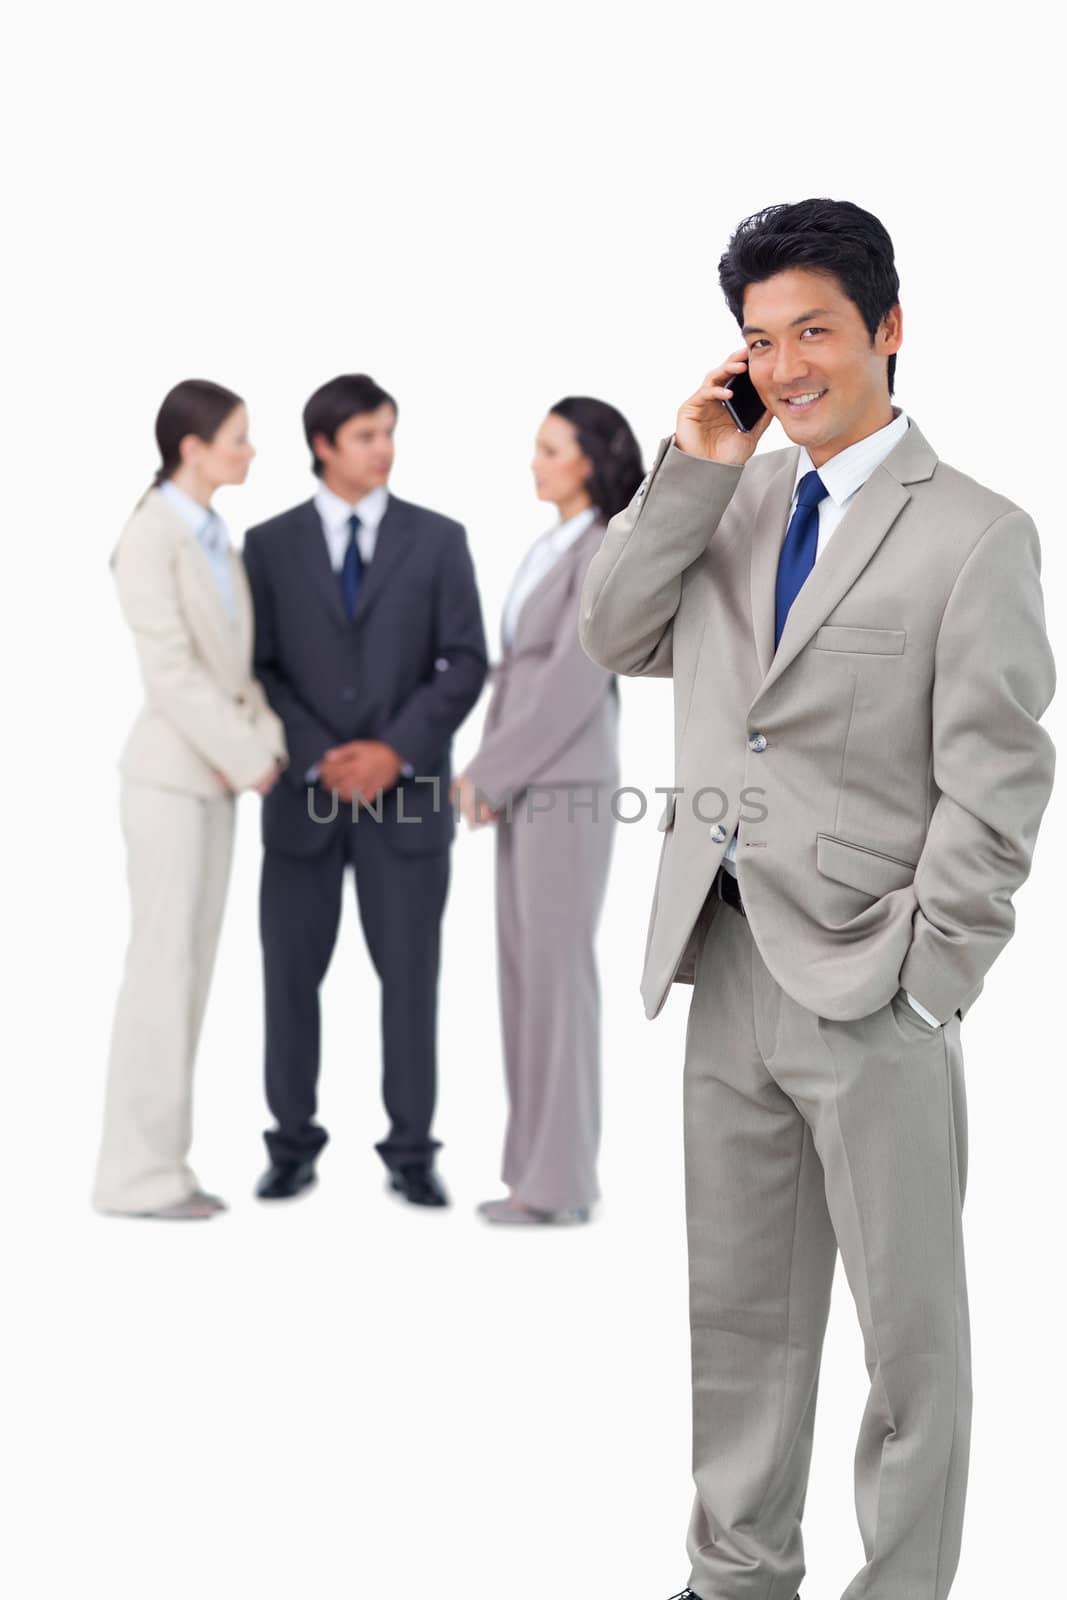 Businessman on cellphone with colleagues behind him against a white background